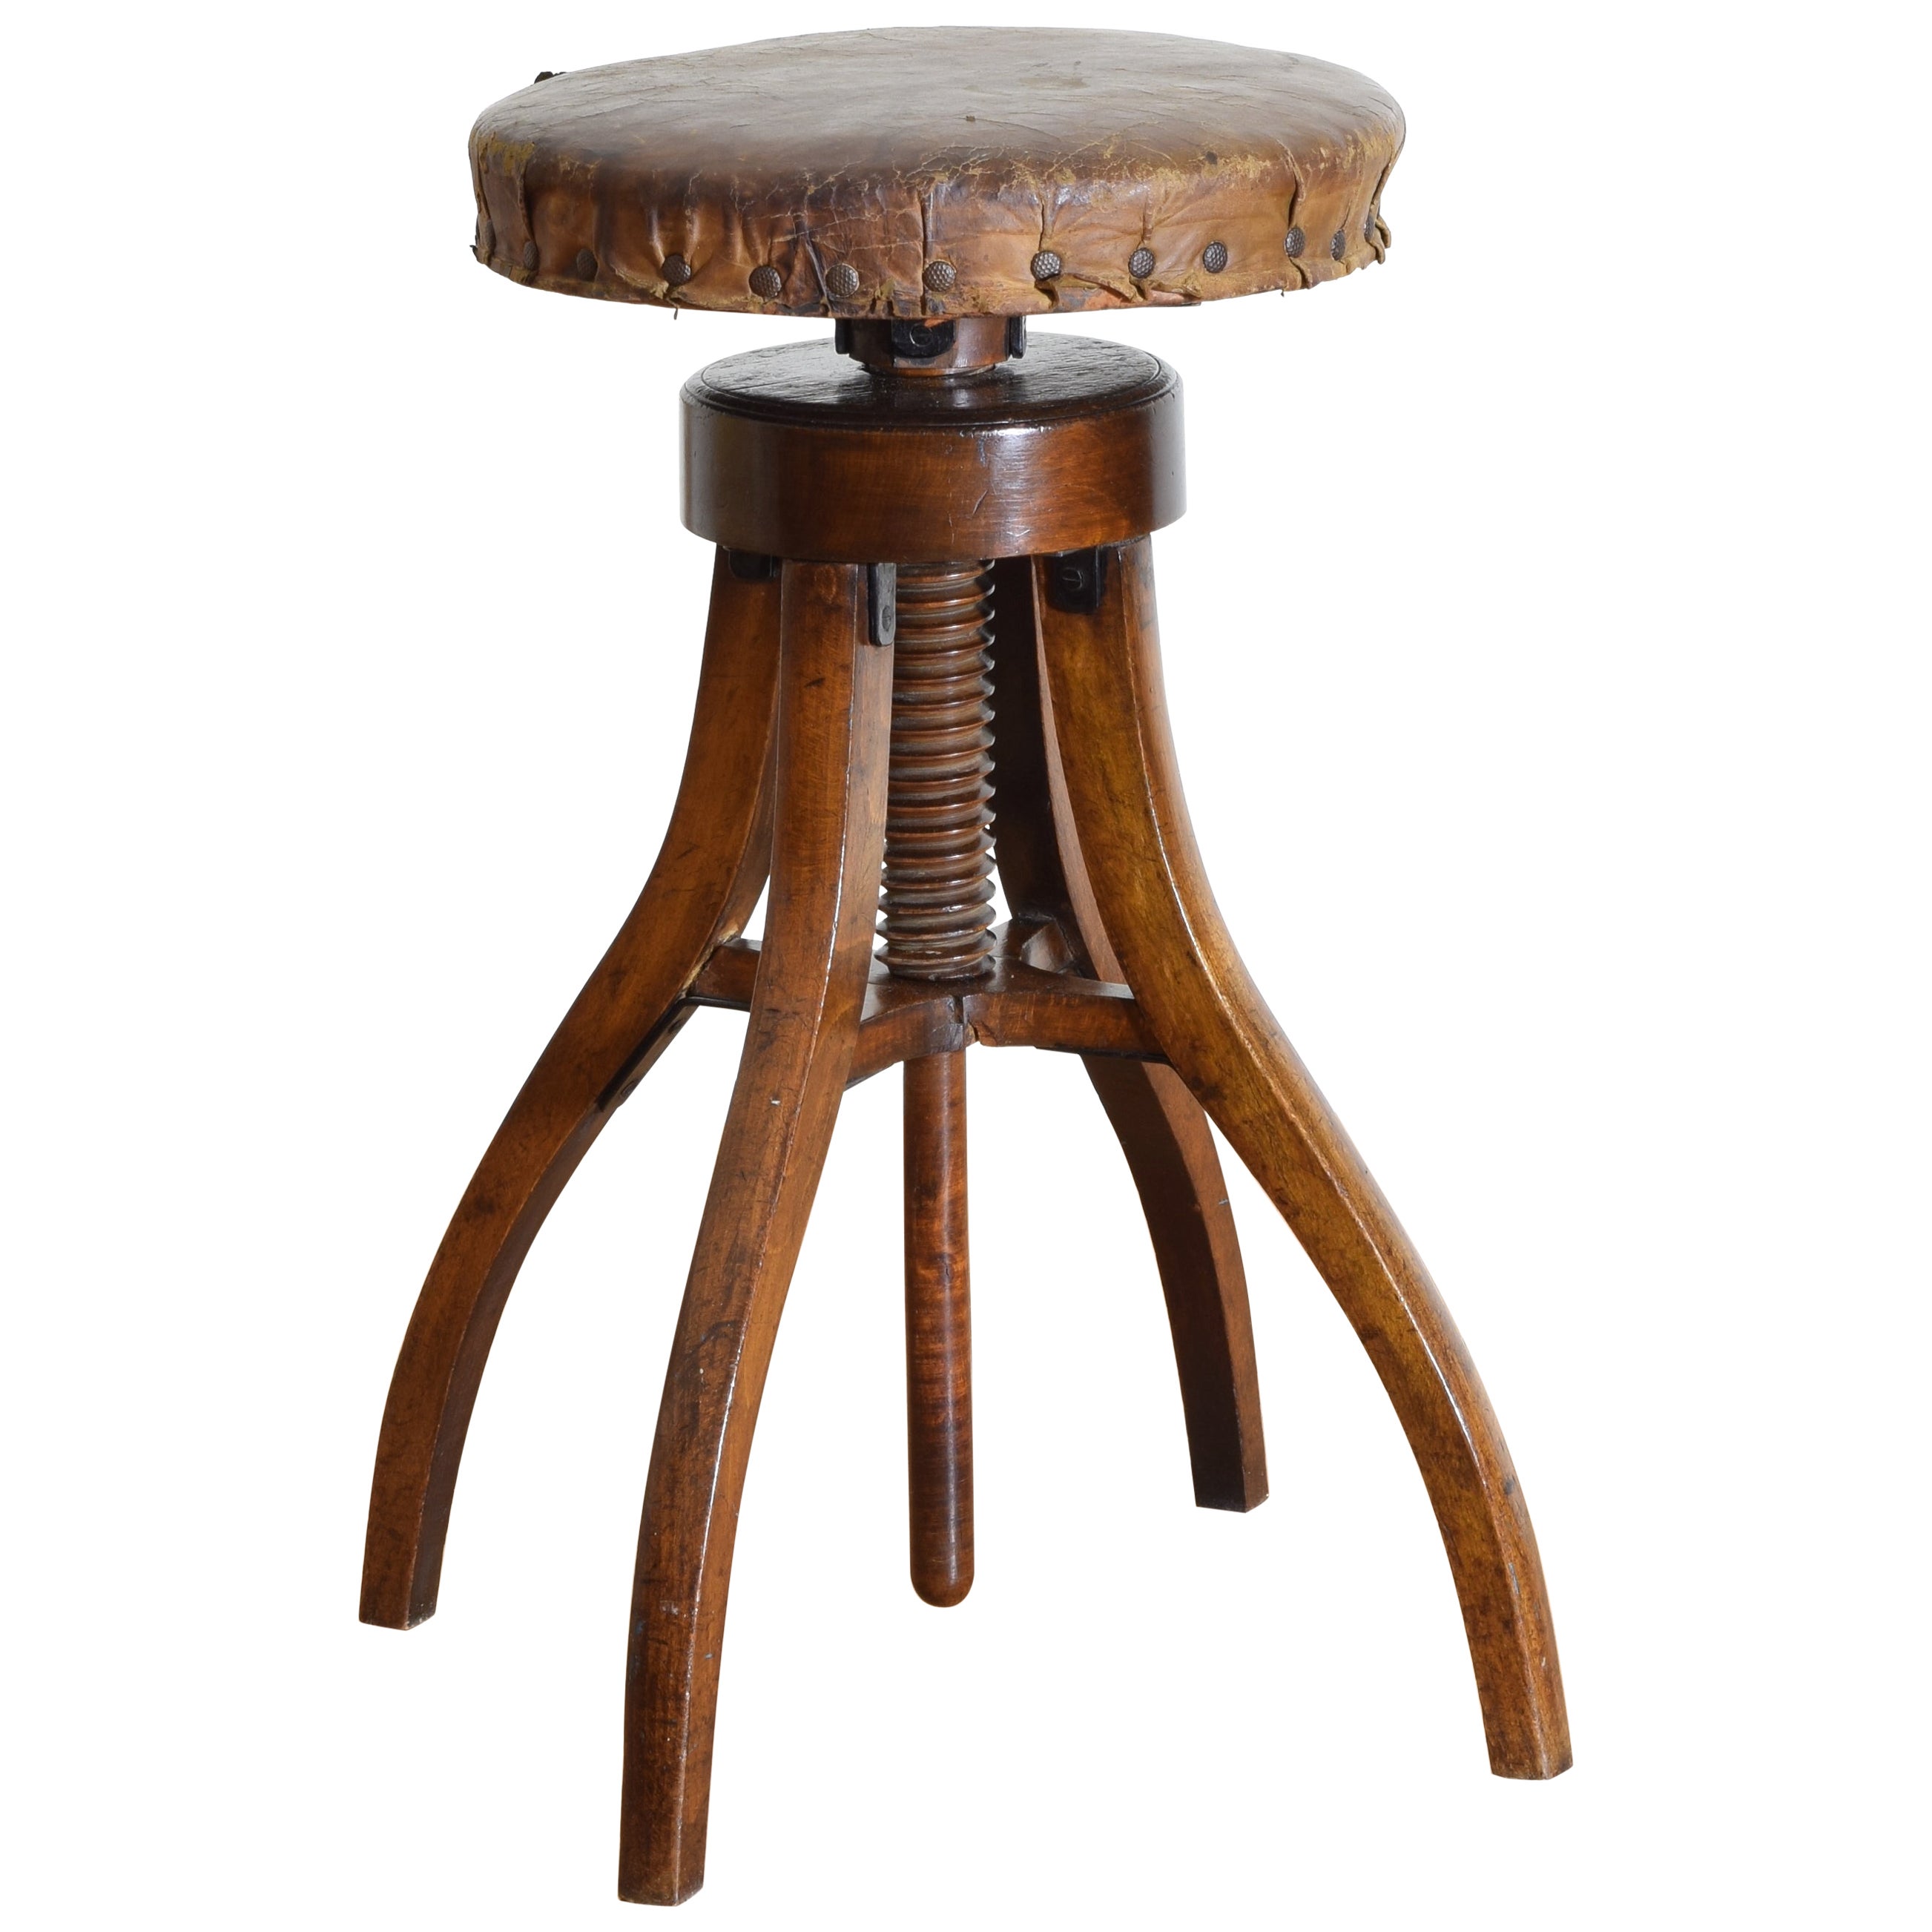 French Walnut and Leather Adjustable Stool, circa 1900